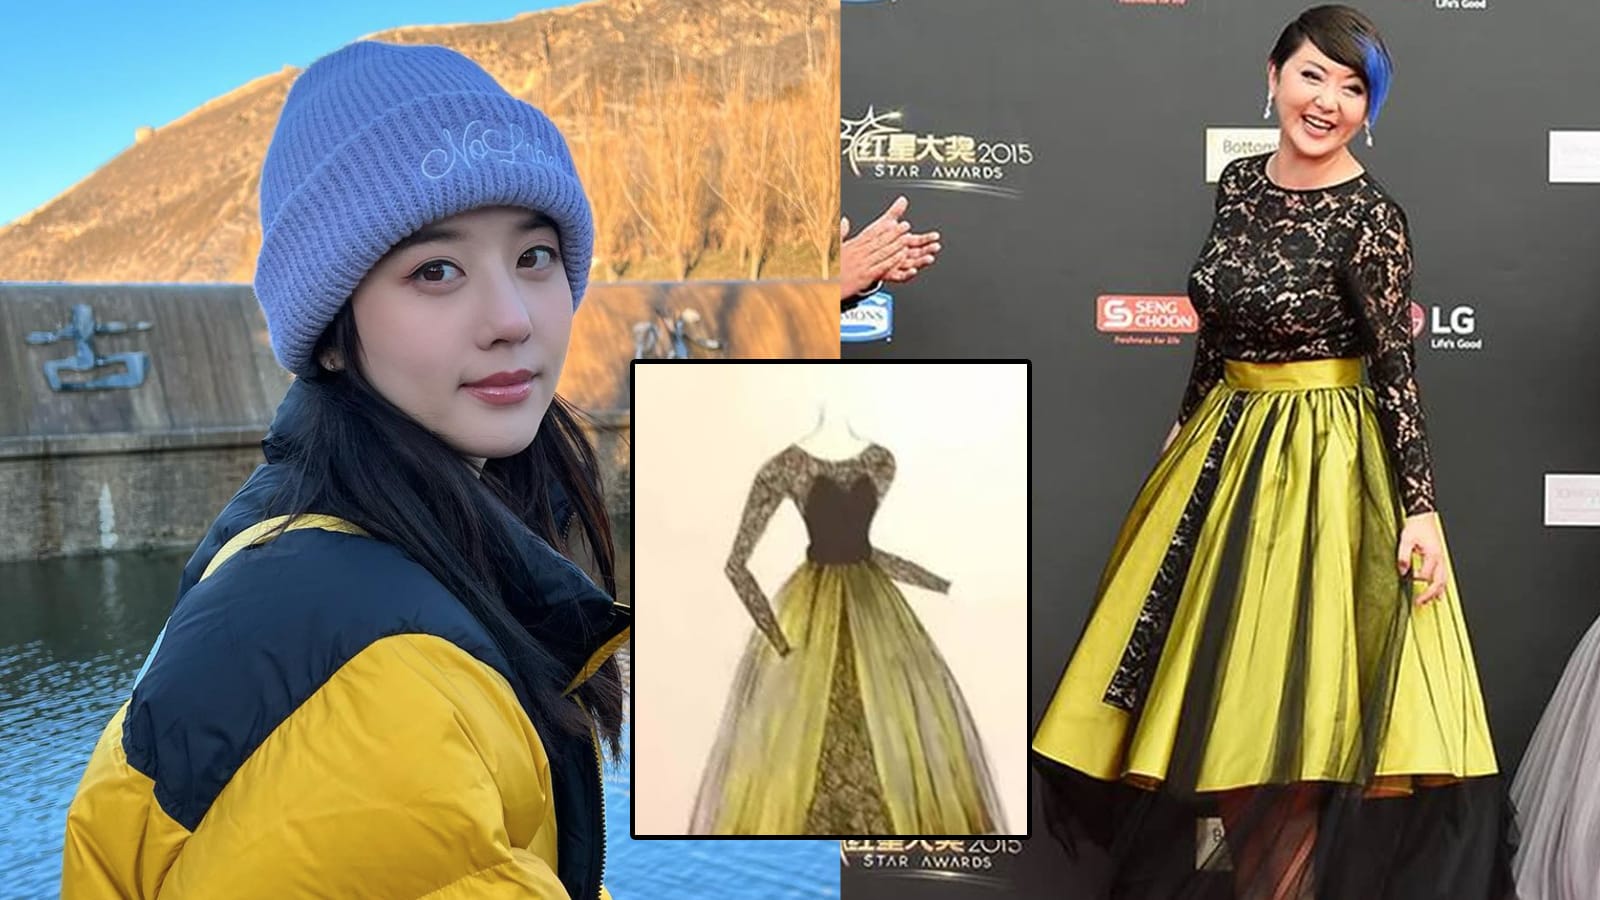 Eleanor Lee, 22, Who Used To Design Star Awards Outfits For Her Mum Quan Yifeng, Now Has Her Own Fashion Brand